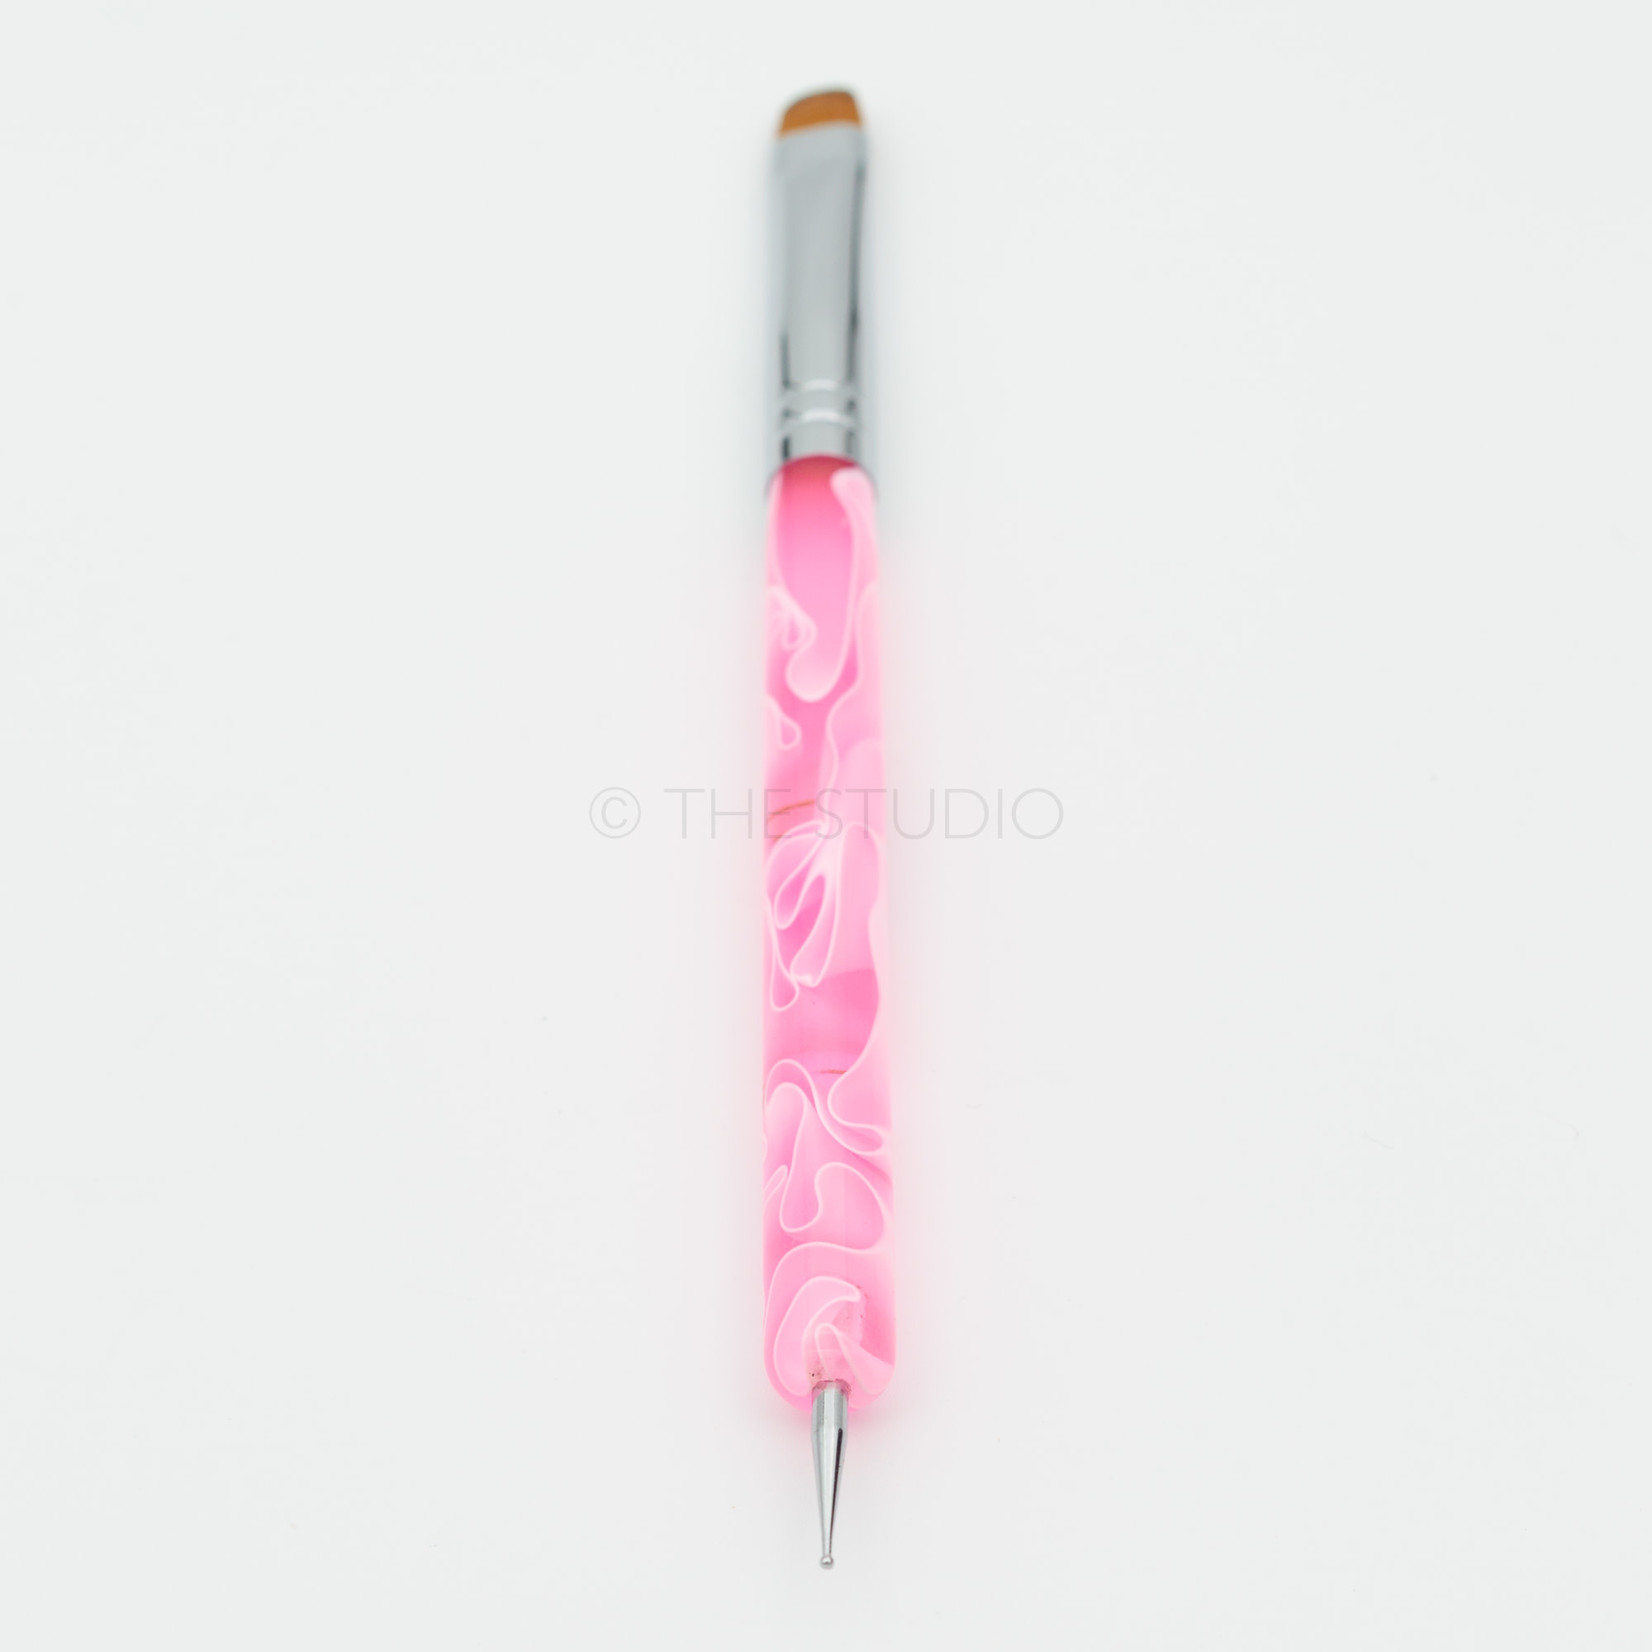 Cre8tion Cre8tion - French Brush w/ Dotting Tool - #10 Pink - 12125